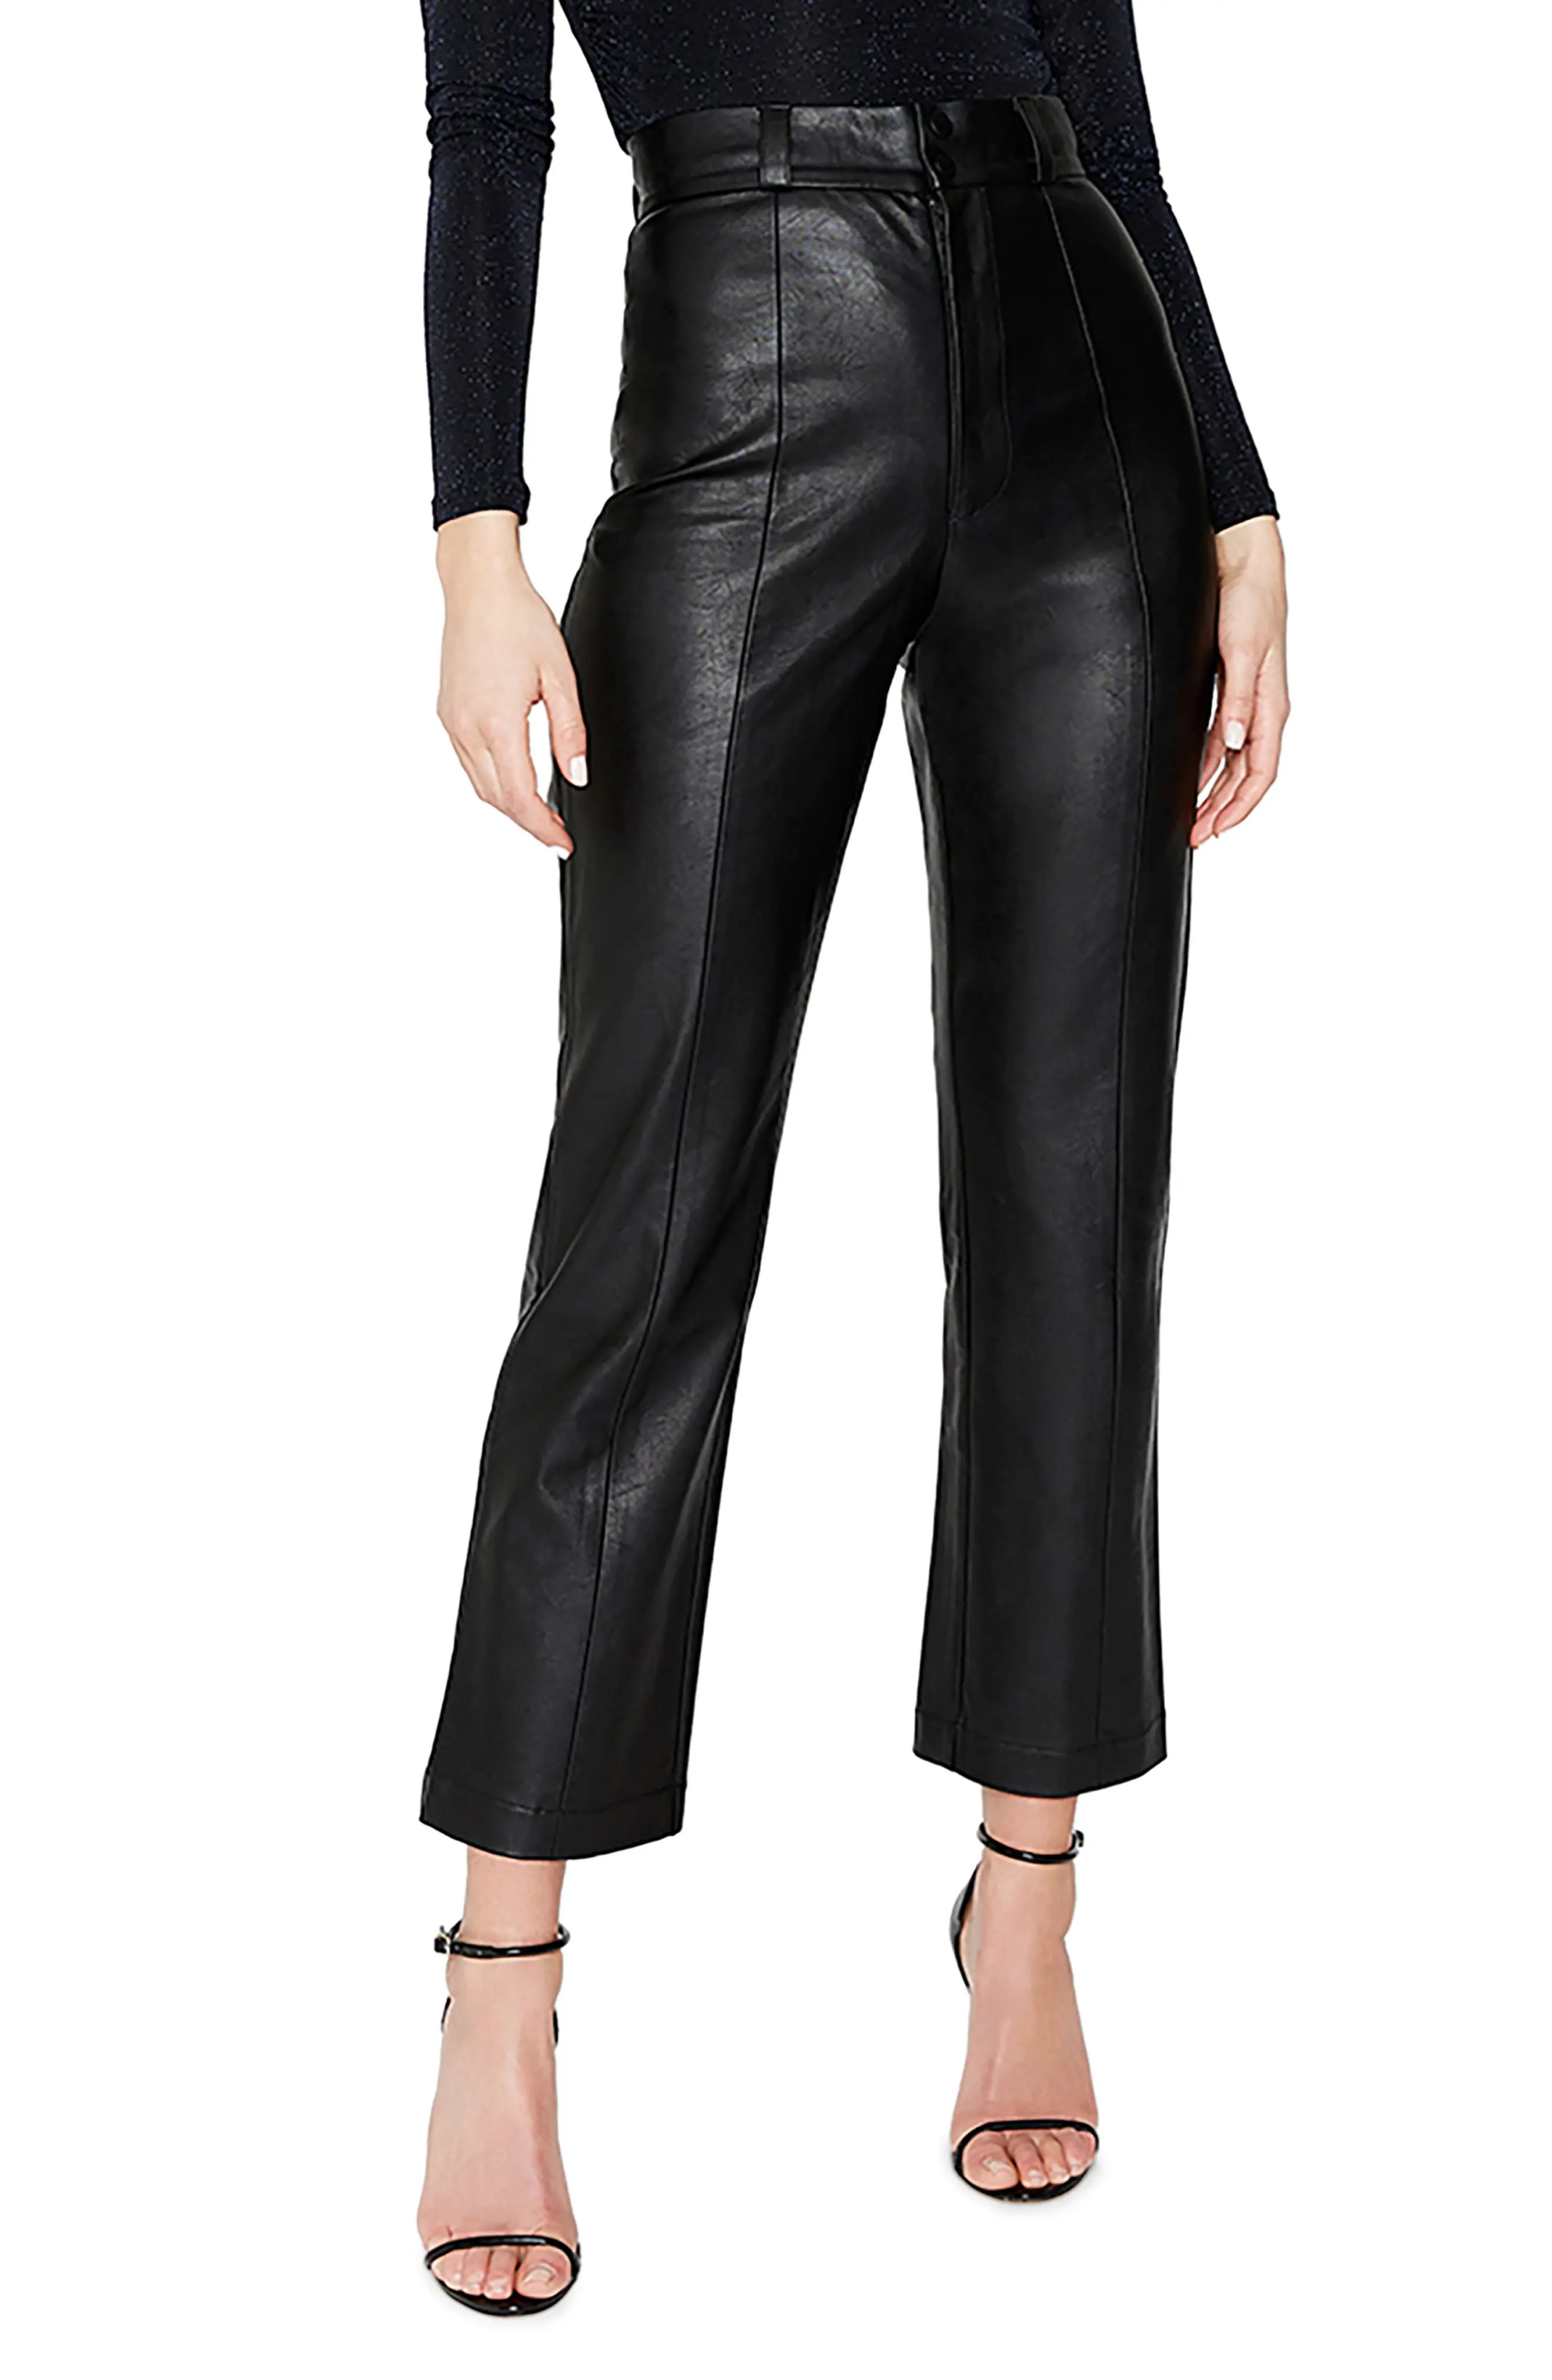 Bardot Faux Leather Pants, Size 10 in Black at Nordstrom | Nordstrom